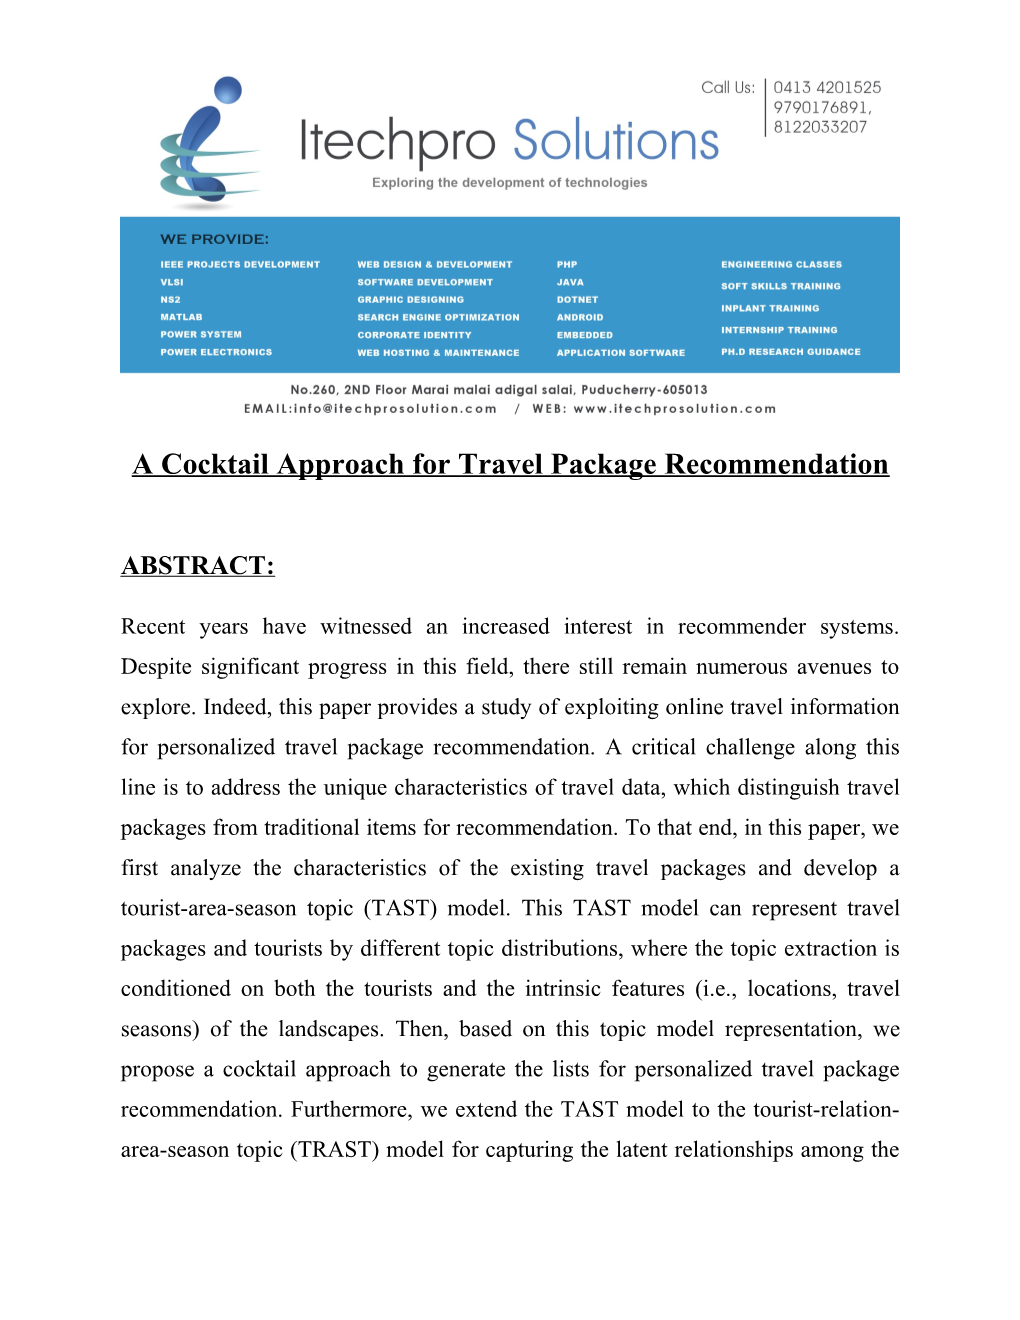 A Cocktail Approach for Travel Package Recommendation